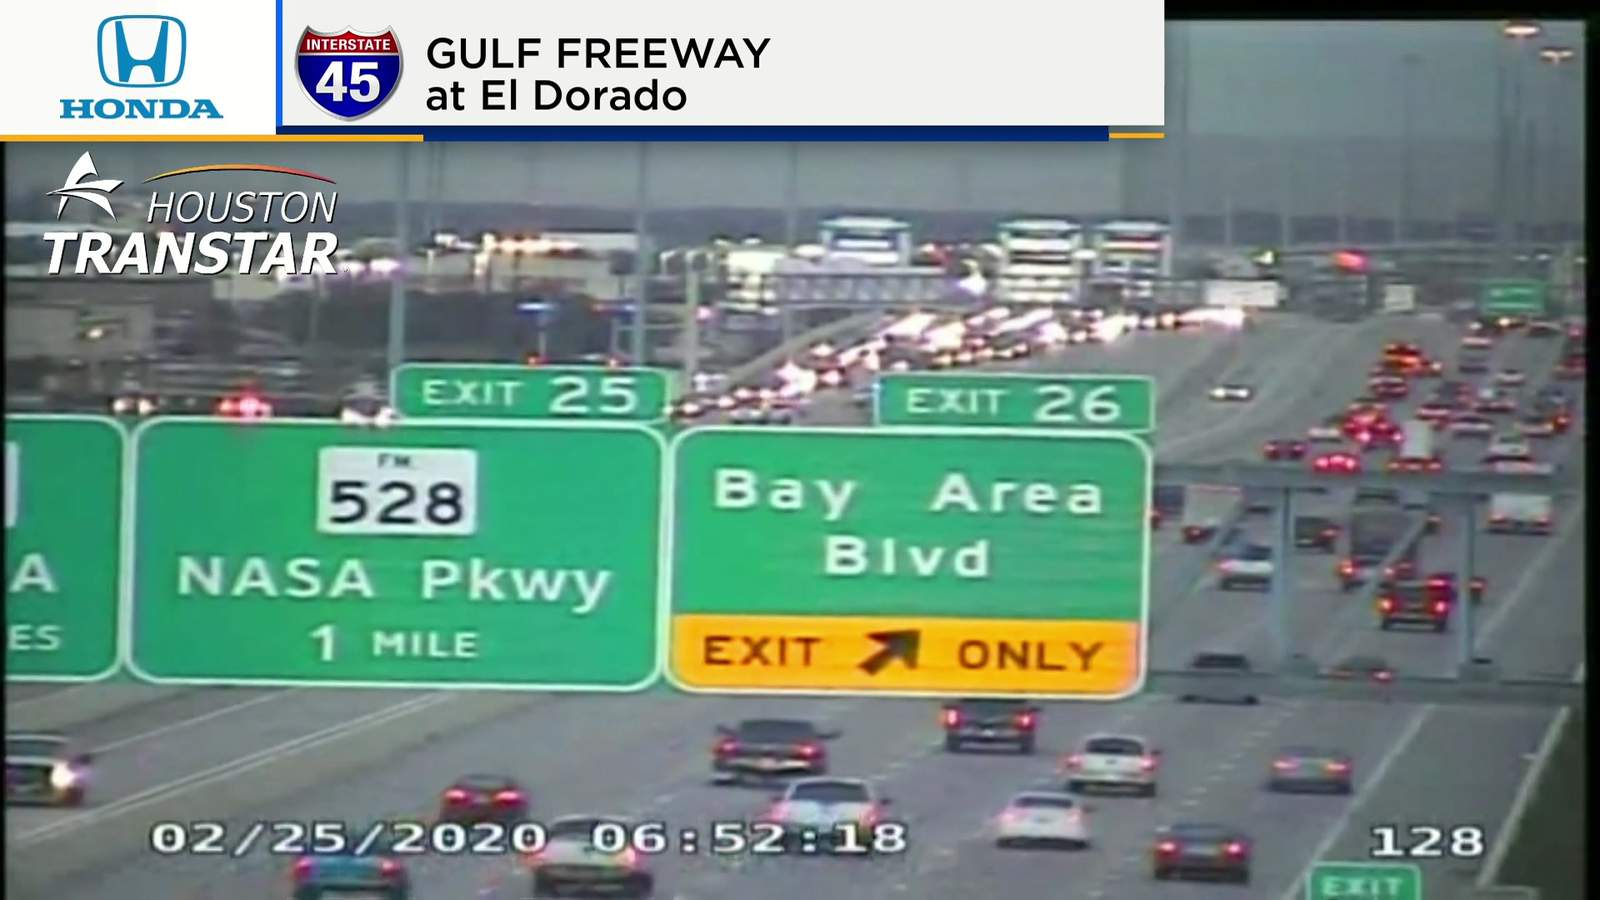 Lanes reopen after accident causes major gridlock for commuters on Gulf Freeway, authorities say